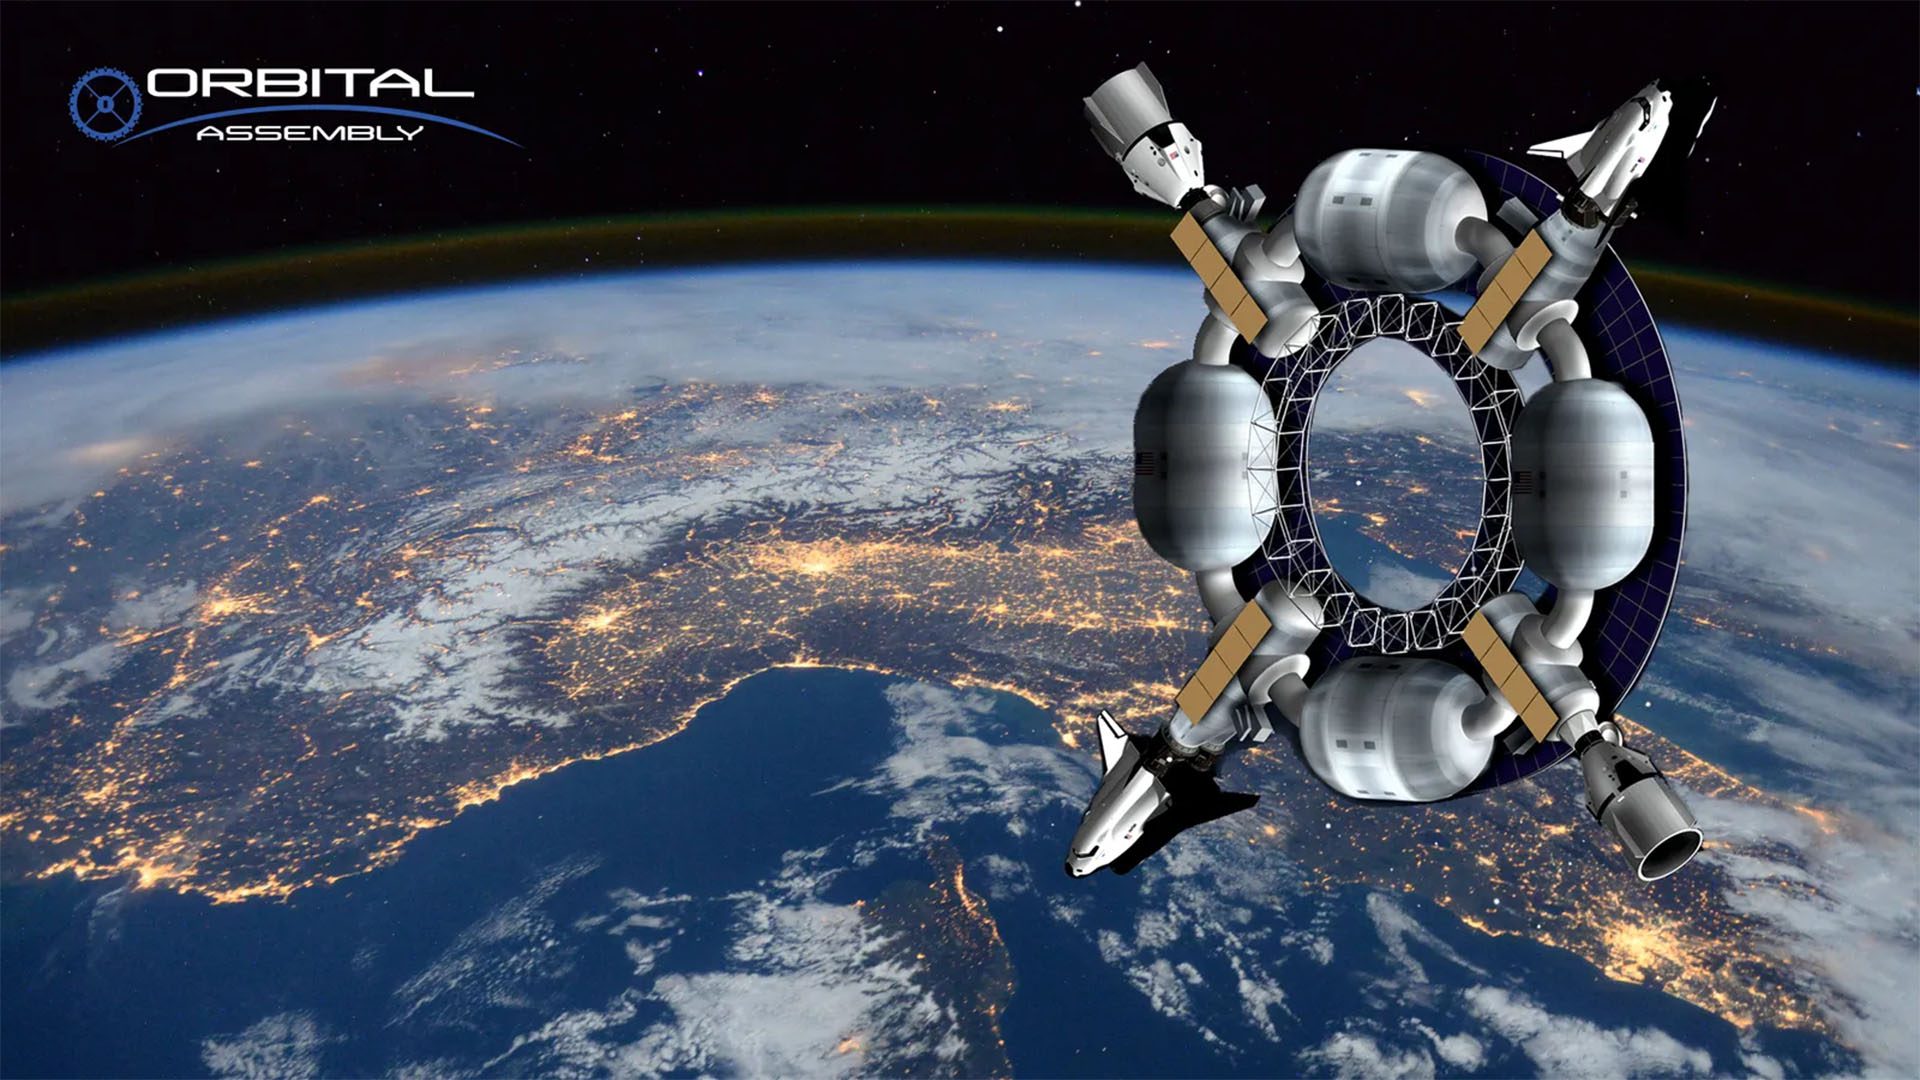 Orbital Assembly's first space hotel